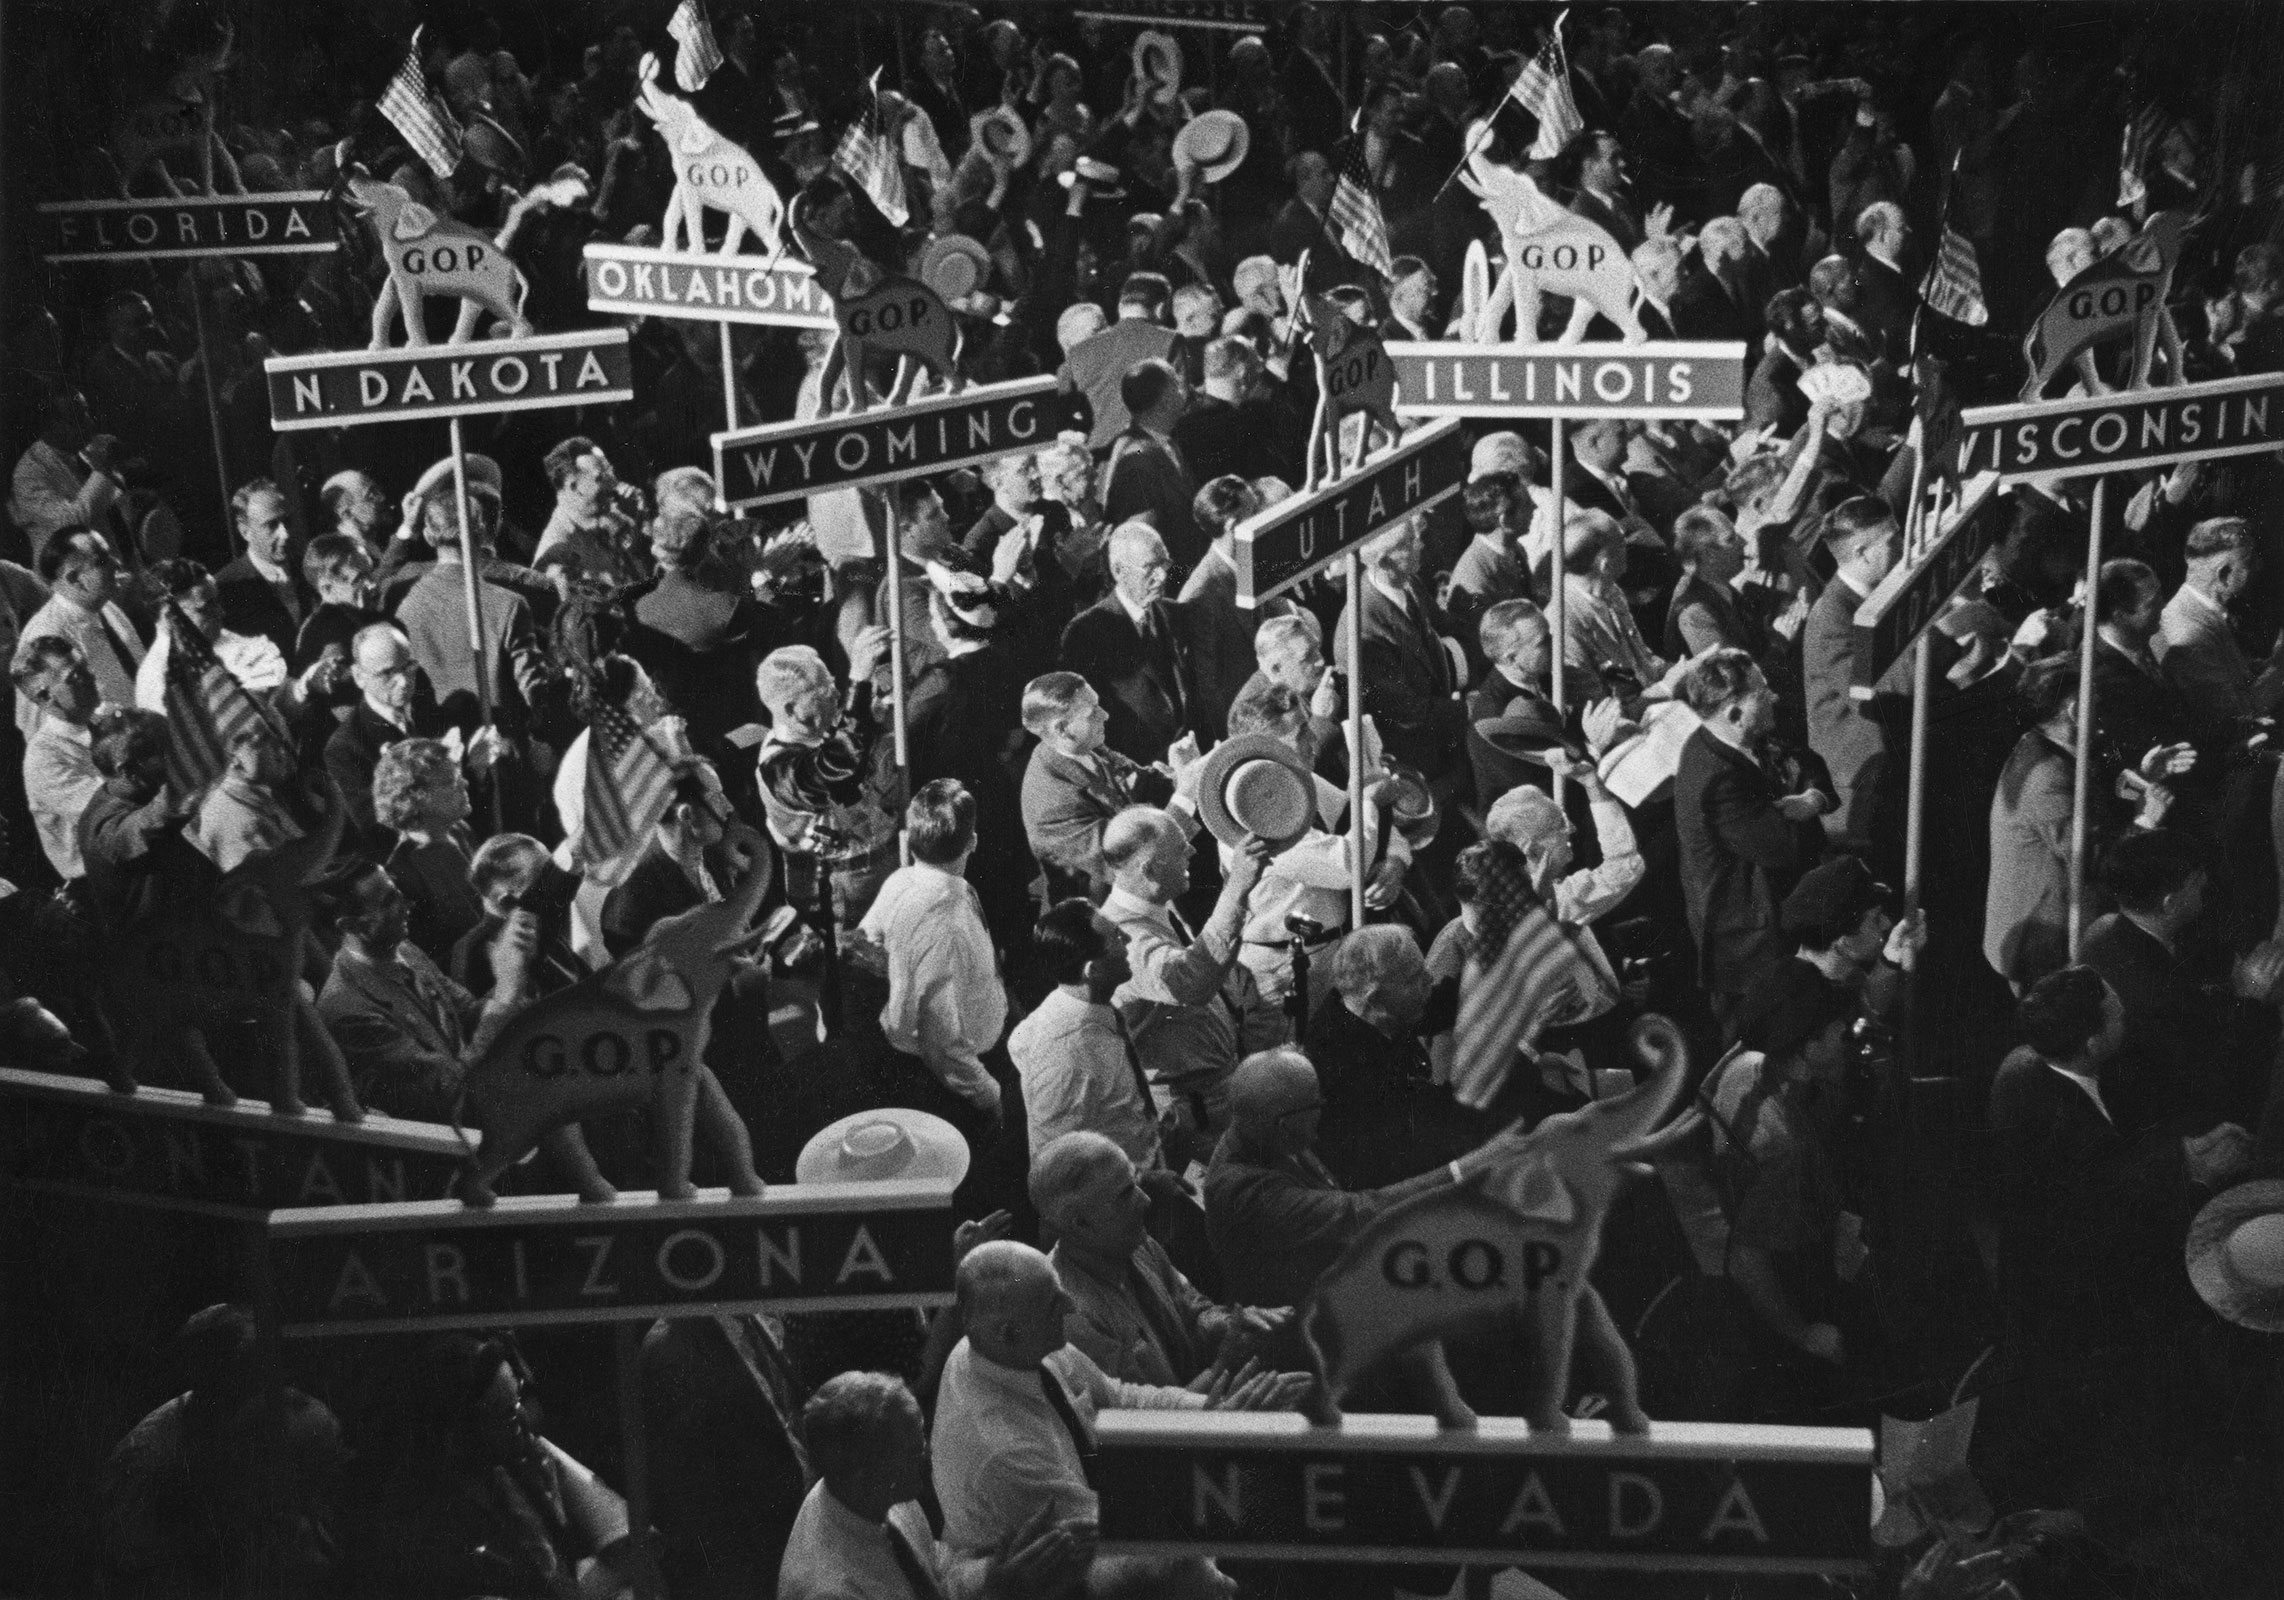 Delegates attend the 1956 Republican National Convention held at the Cow Palace in San Francisco, California, in 1956.